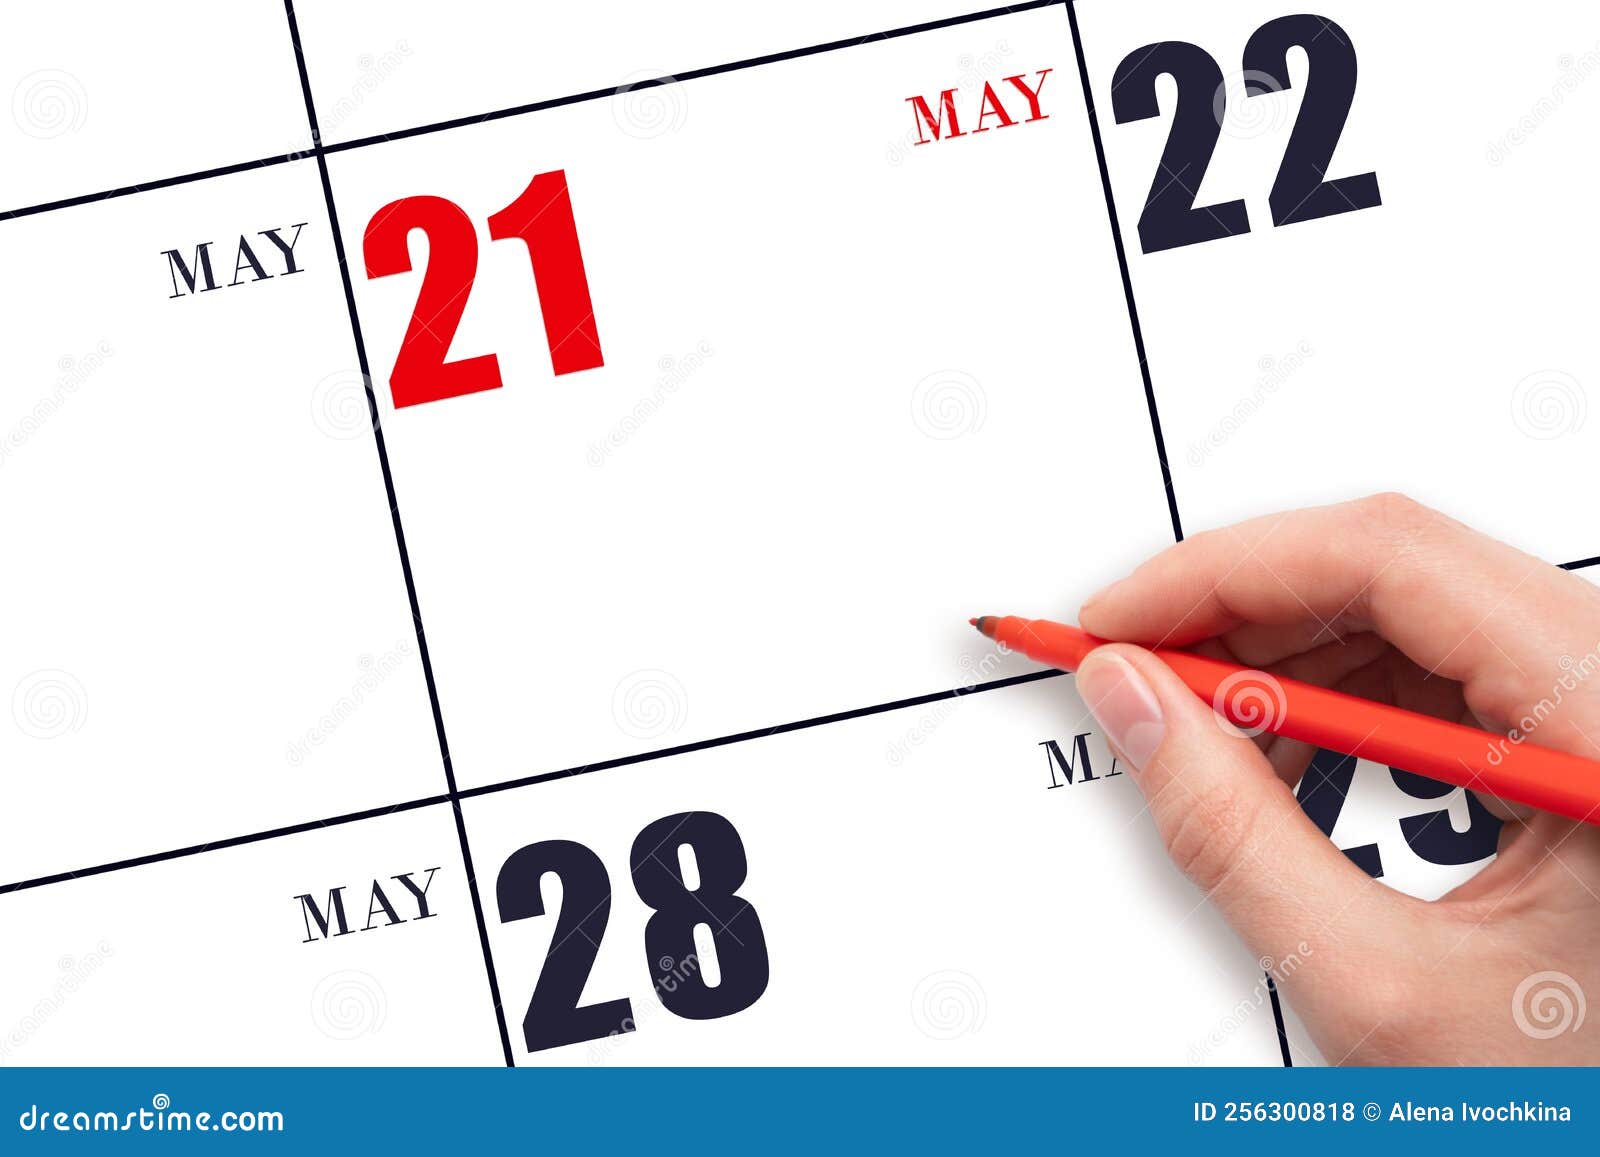 A Hand Holding a Red Pen and Pointing on the Calendar Date May 21. Red